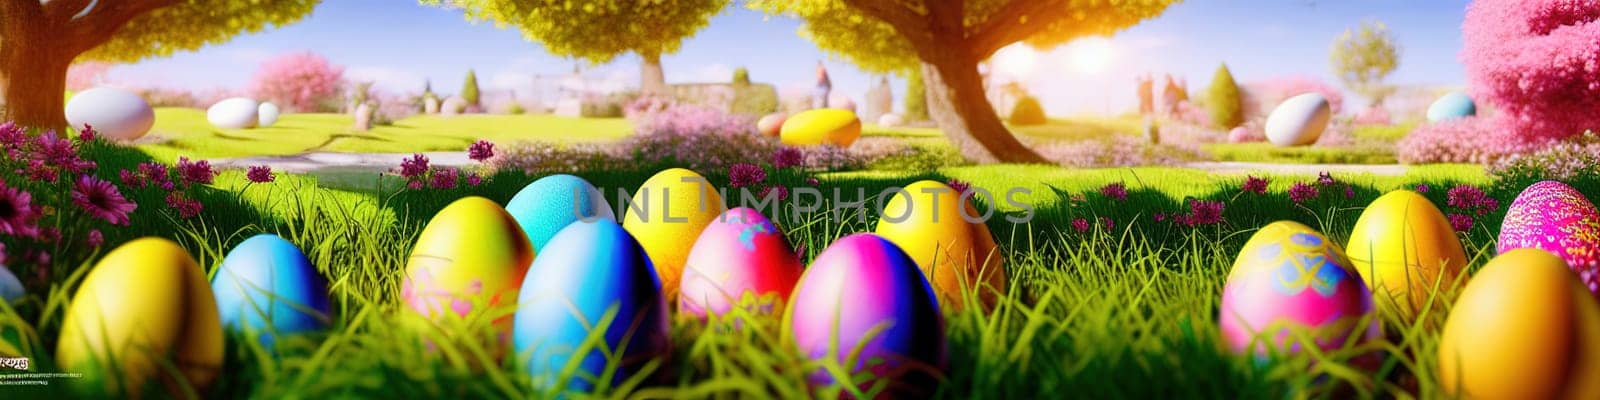 Fresh spring background with easter eggs banner green juicy meadow. Colored Easter eggs hidden flowers grass.Easter by EkaterinaPereslavtseva